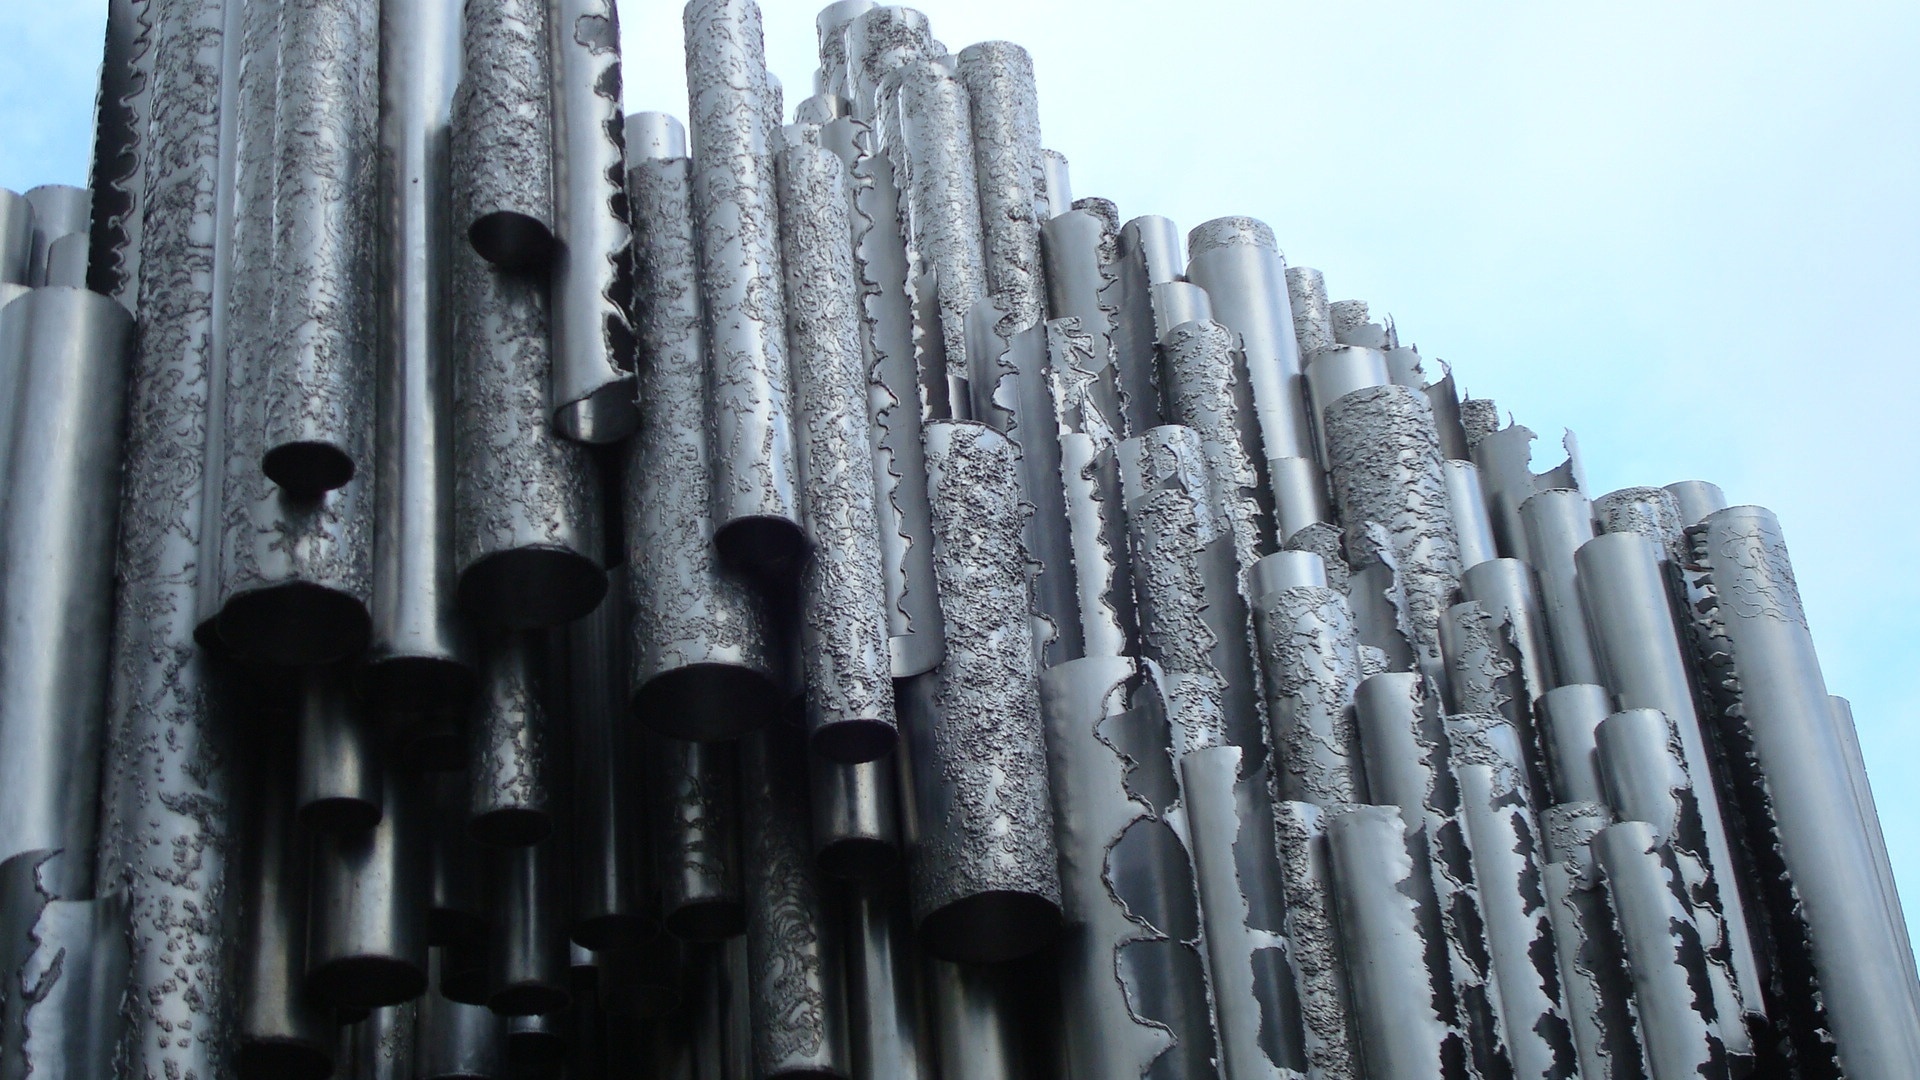 Such a beautiful park with this amazing sculpture to Jean Sibelius.  It resembles a modern view of the pipes of an organ.  If the wind is blowing you get the most wonderful sounds thru the sculpture.